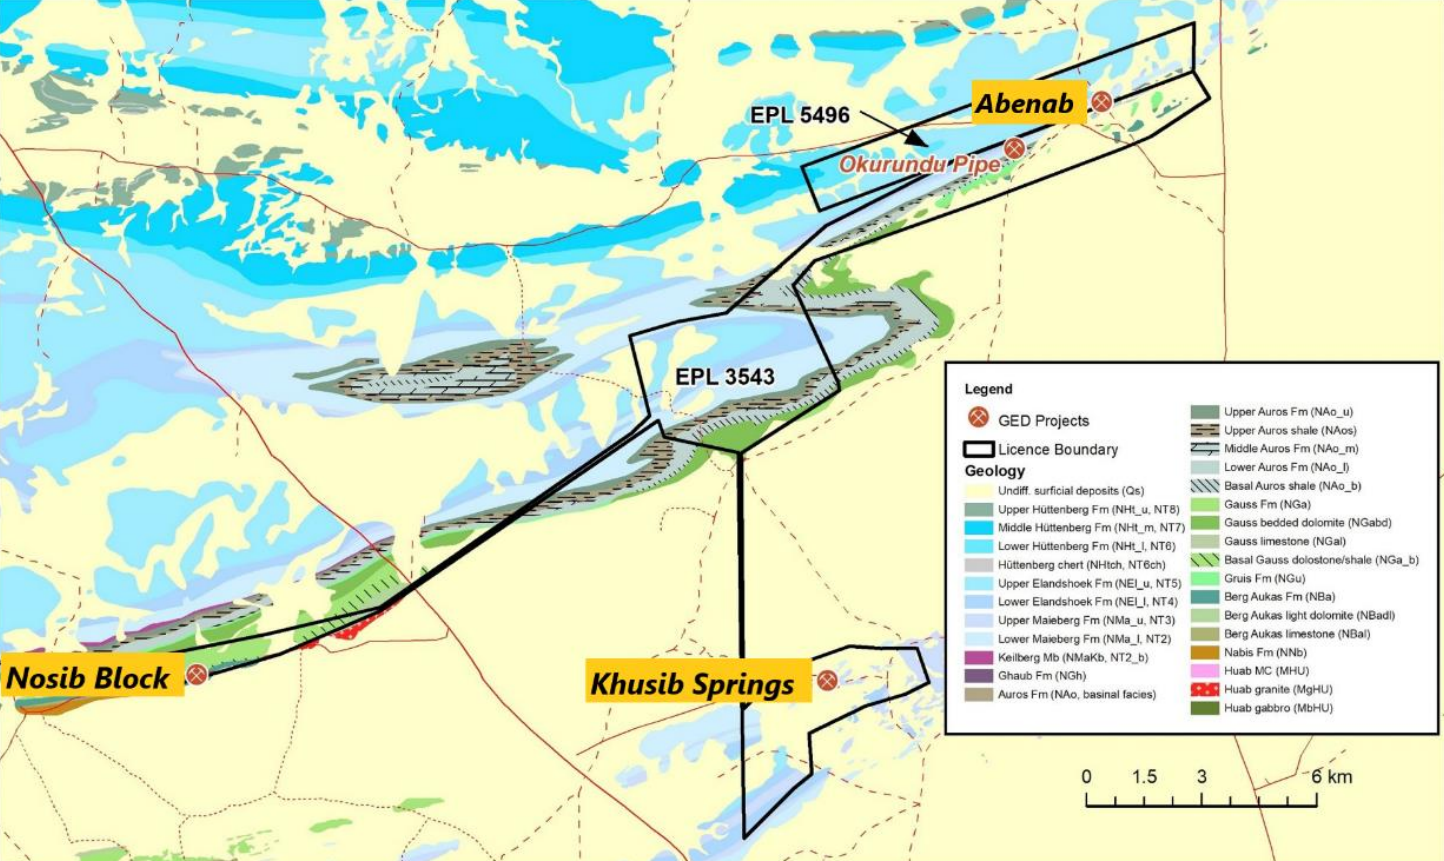 Khusib Springs copper project